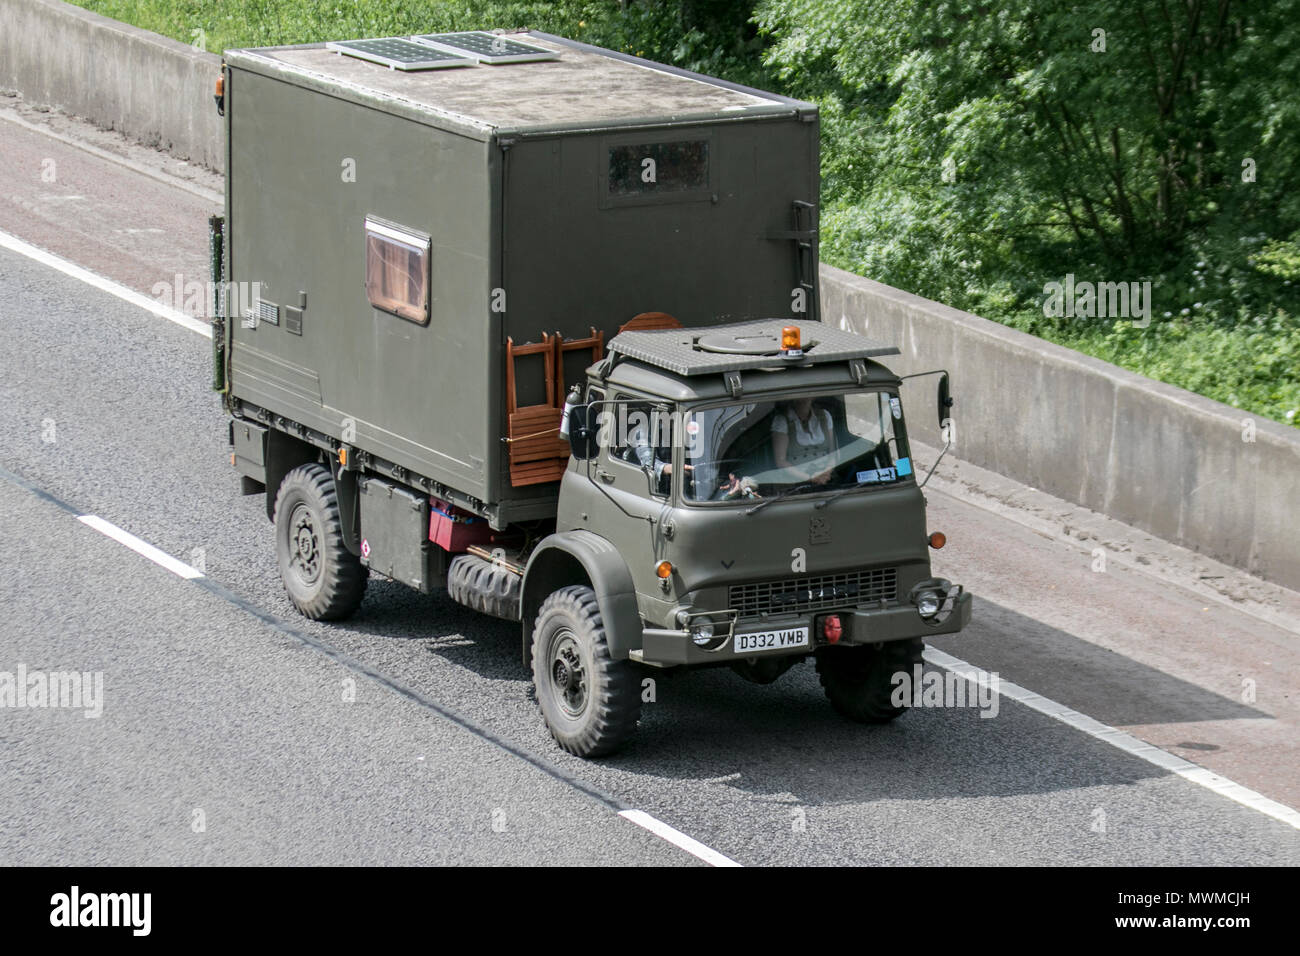 1987 80s eighties Bedford Green Army, haulage, lorry, transportation, truck, cargo, vehicle, delivery, transport, industry, freight, UK Stock Photo